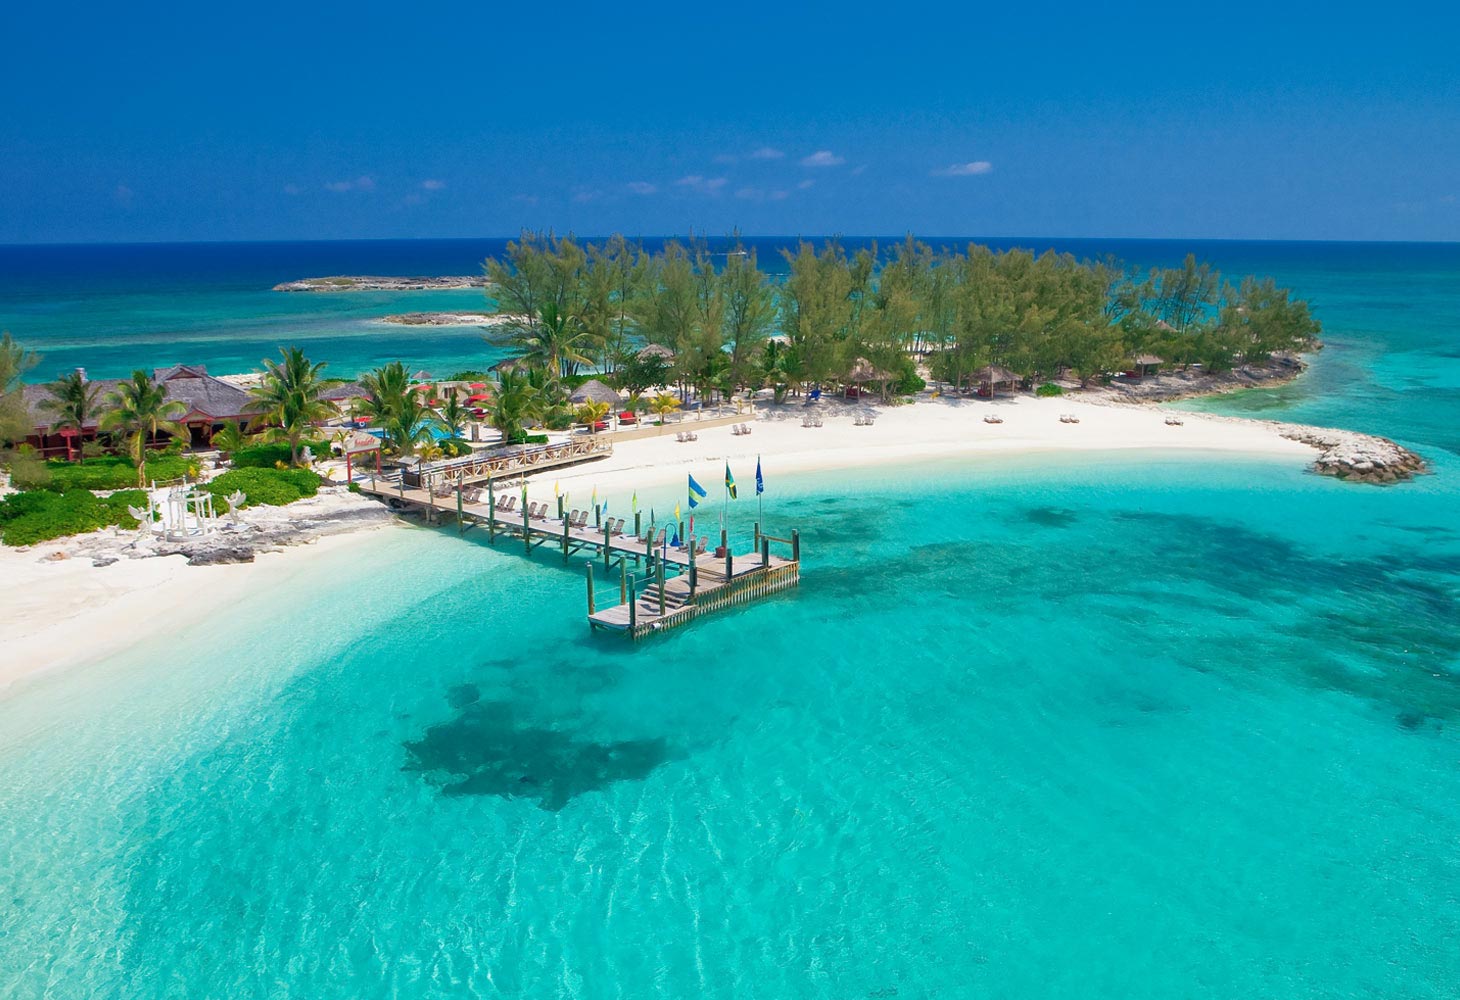 Places to Go for Honeymoon - Bahamas